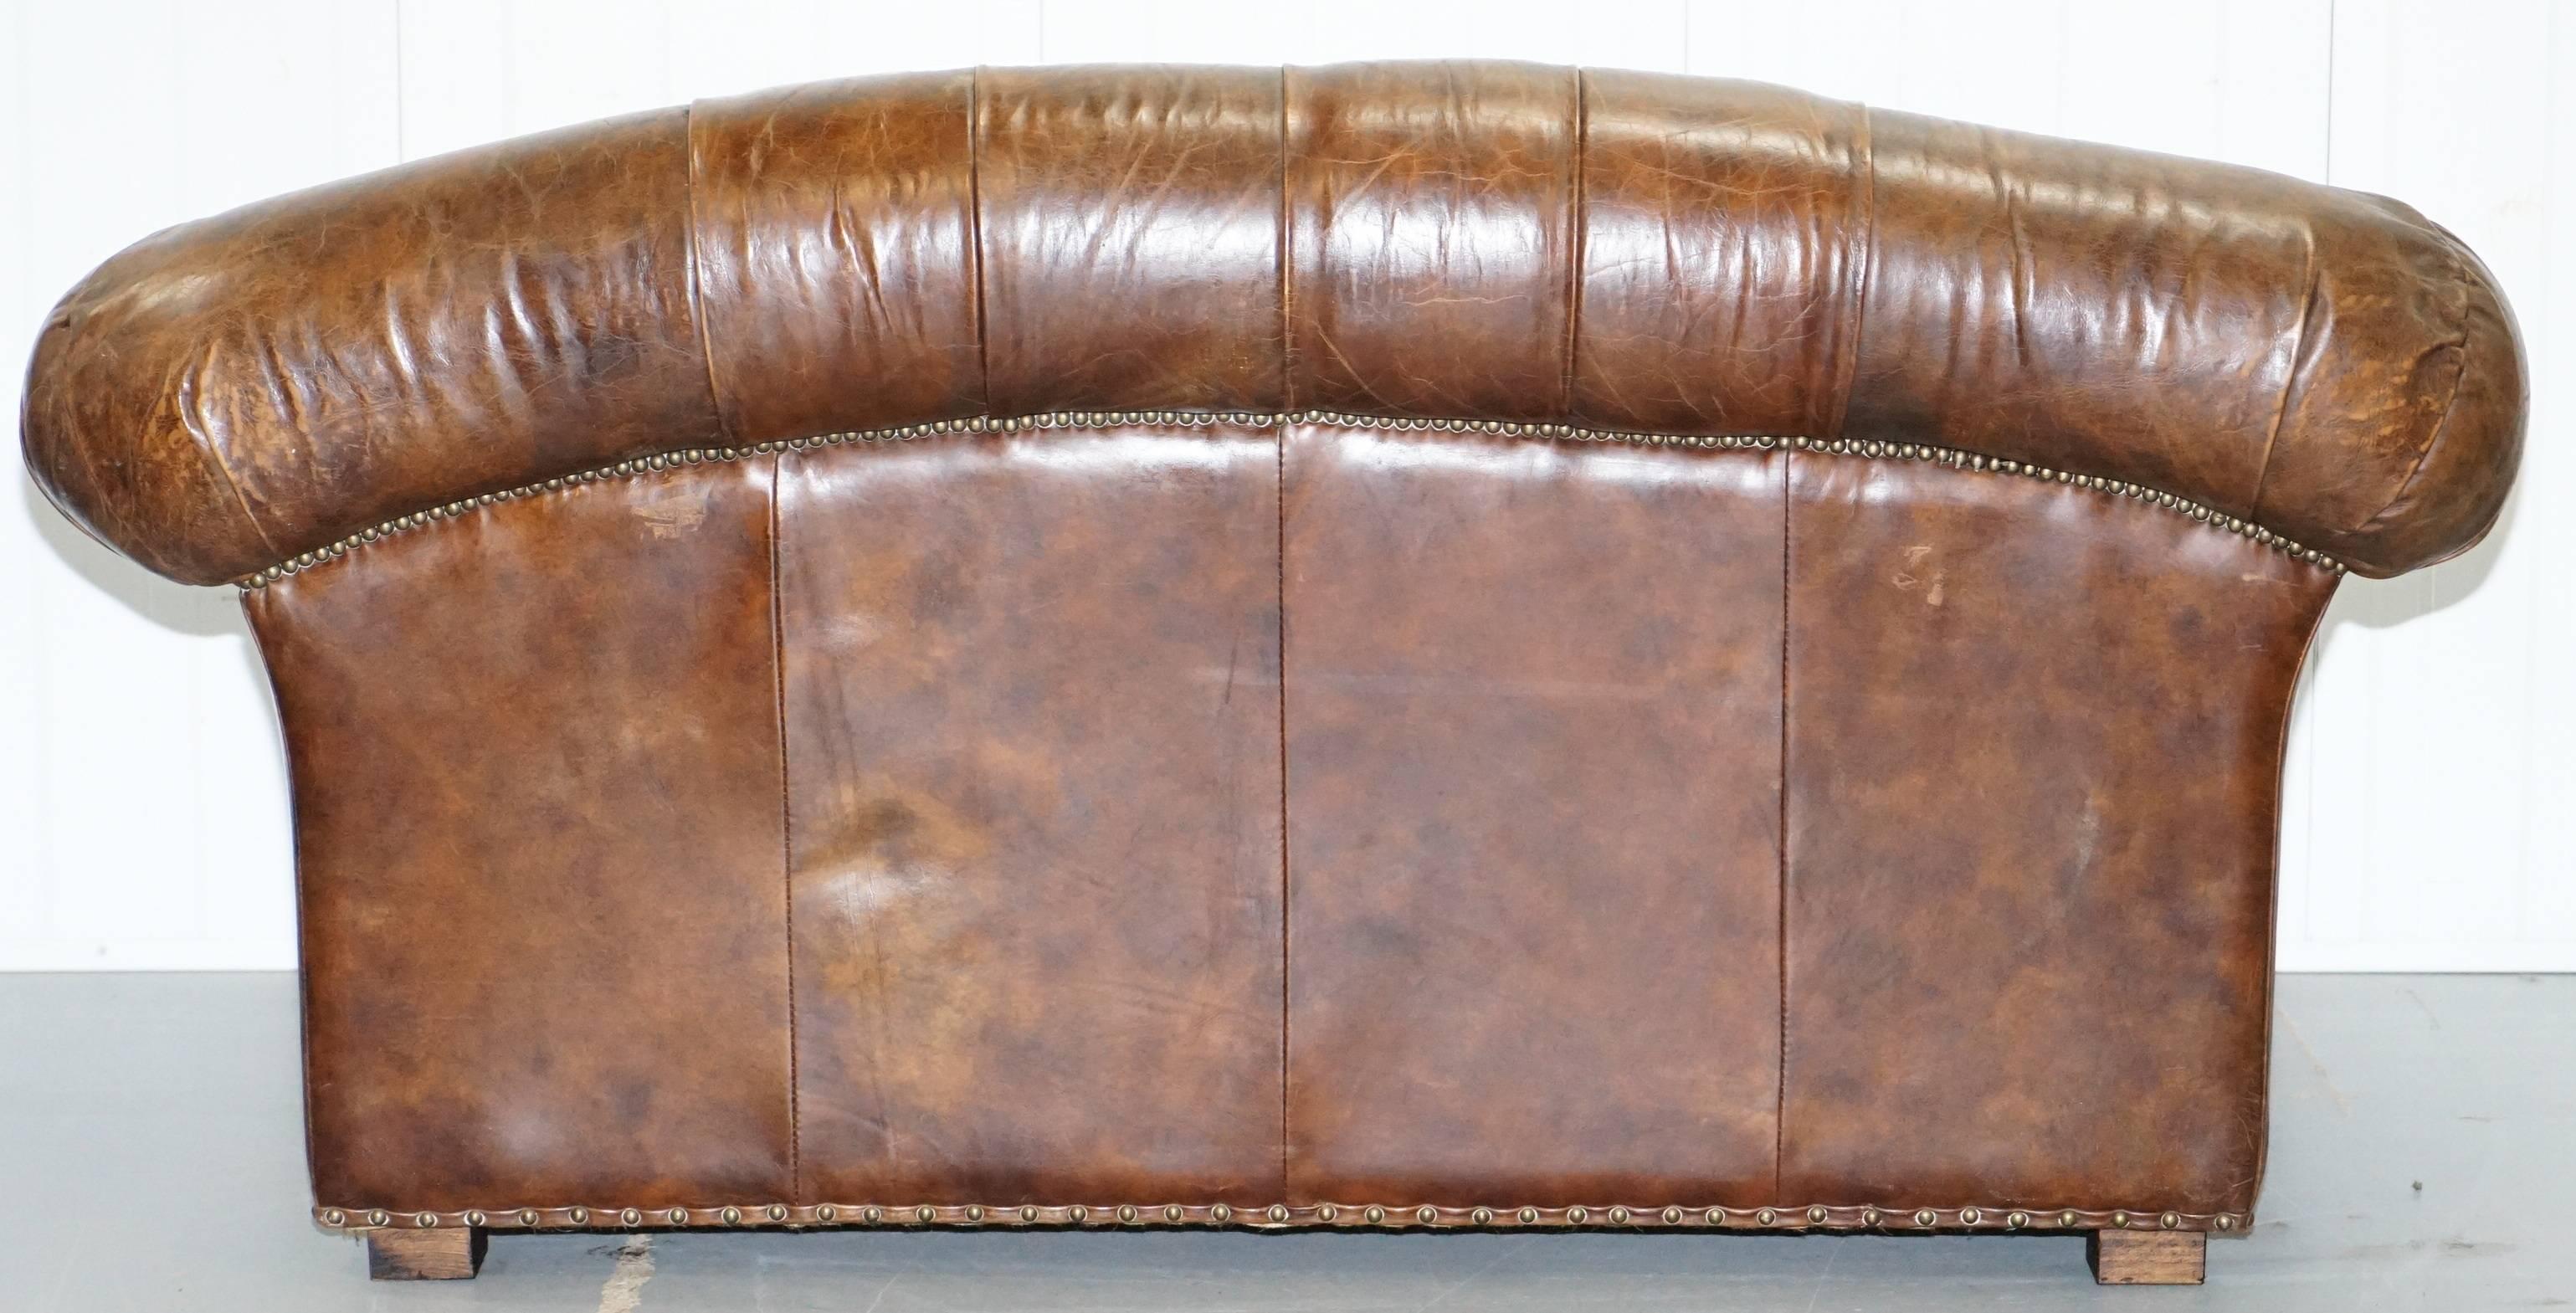 Stunning Aged Brown Heritage Leather Two-Seat Chesterfield Sofa Nice Find 3